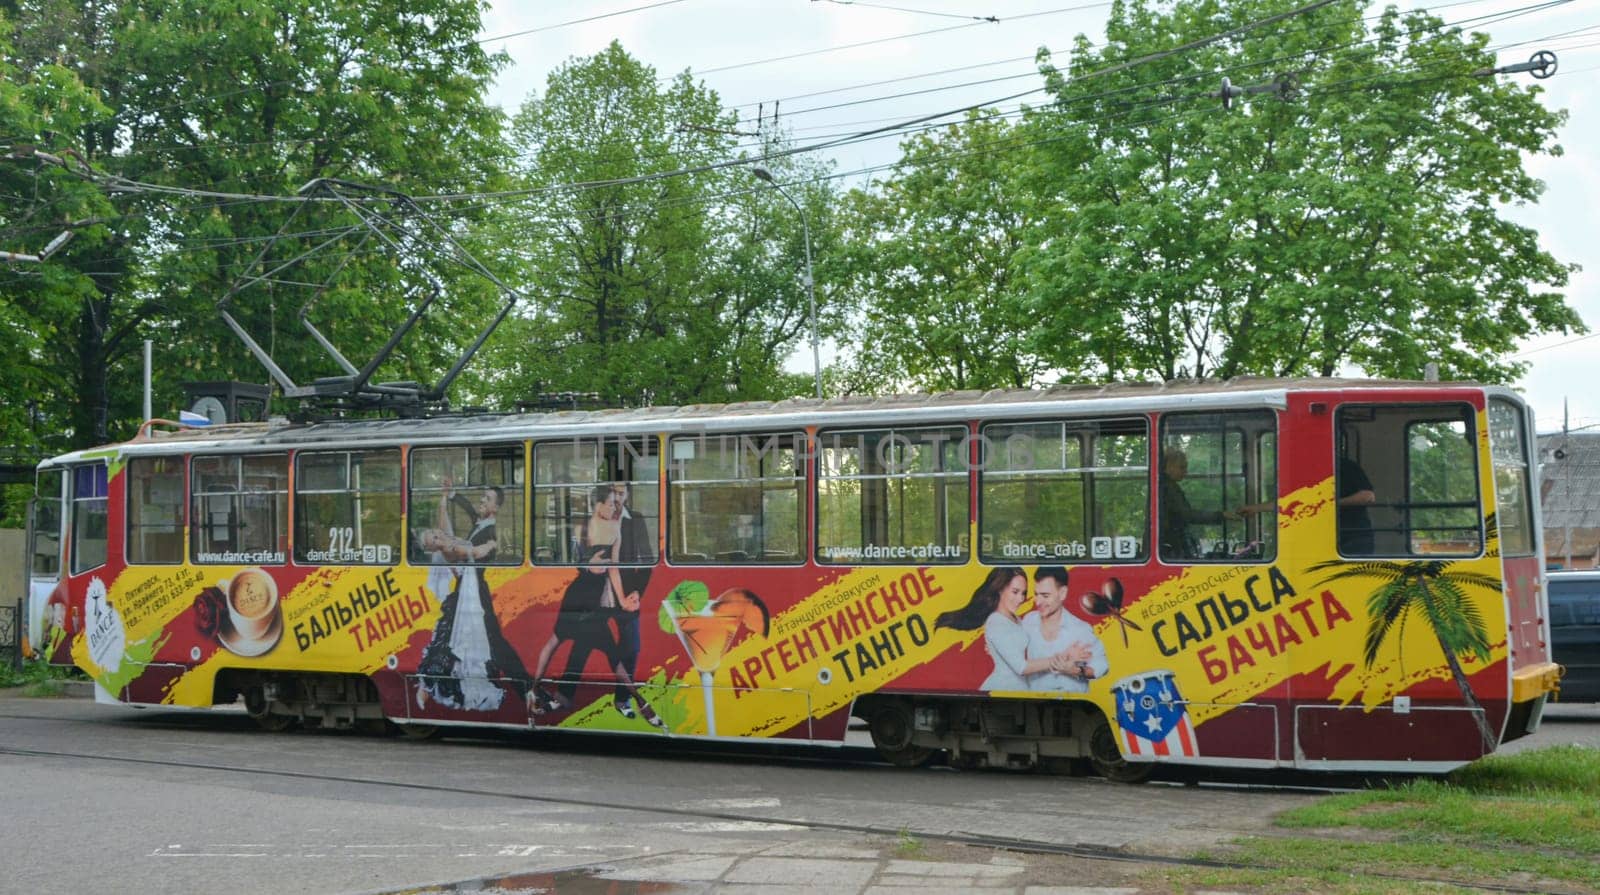 PYATIGORSK, RUSSIA - MAY 04, 2017: Advertising of the dances school on the city tram